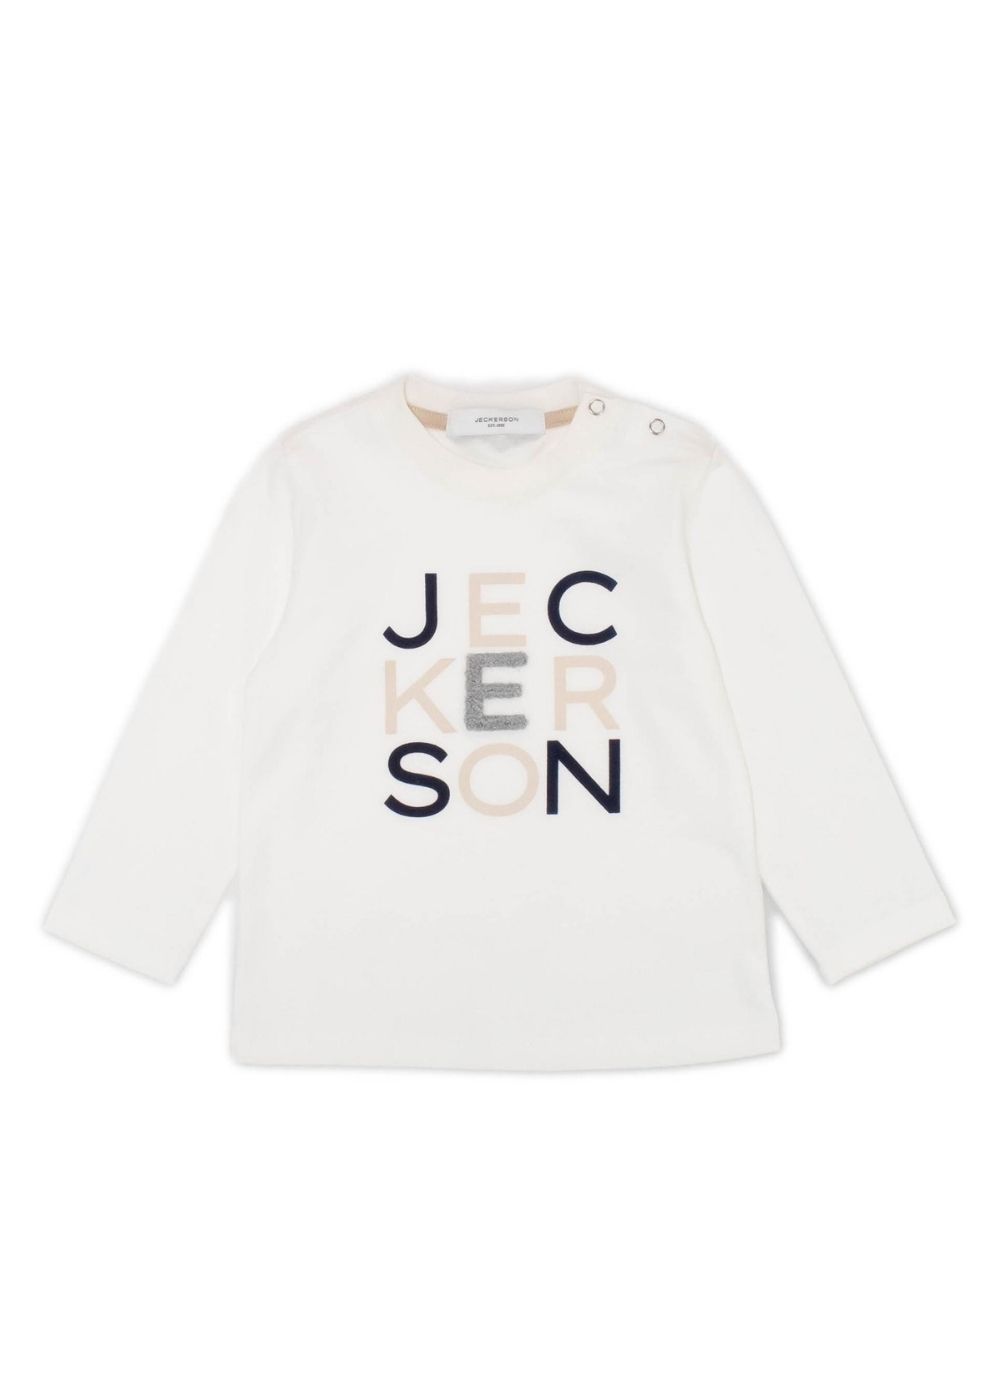 Featured image for “Jeckerson T-shirt Maniche Lunghe”